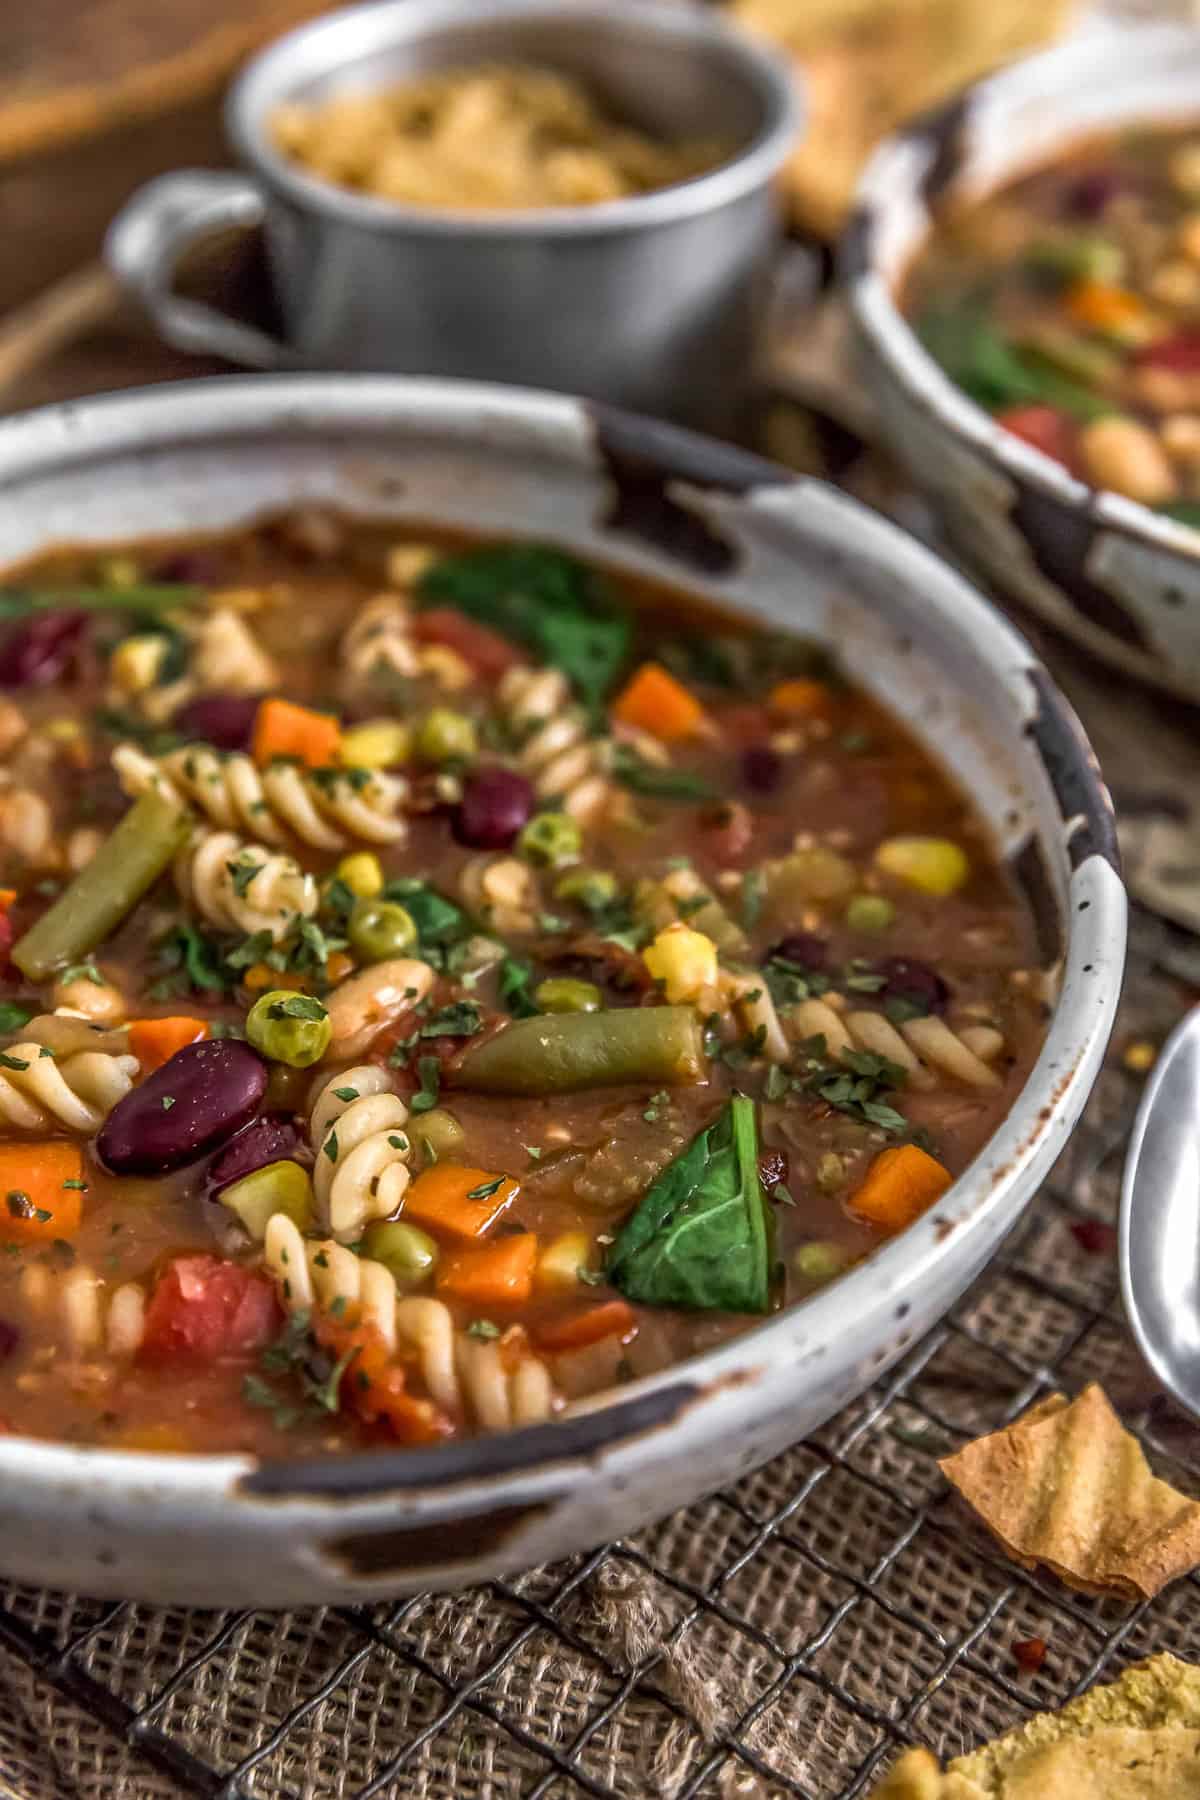 Healthy Minestrone Soup